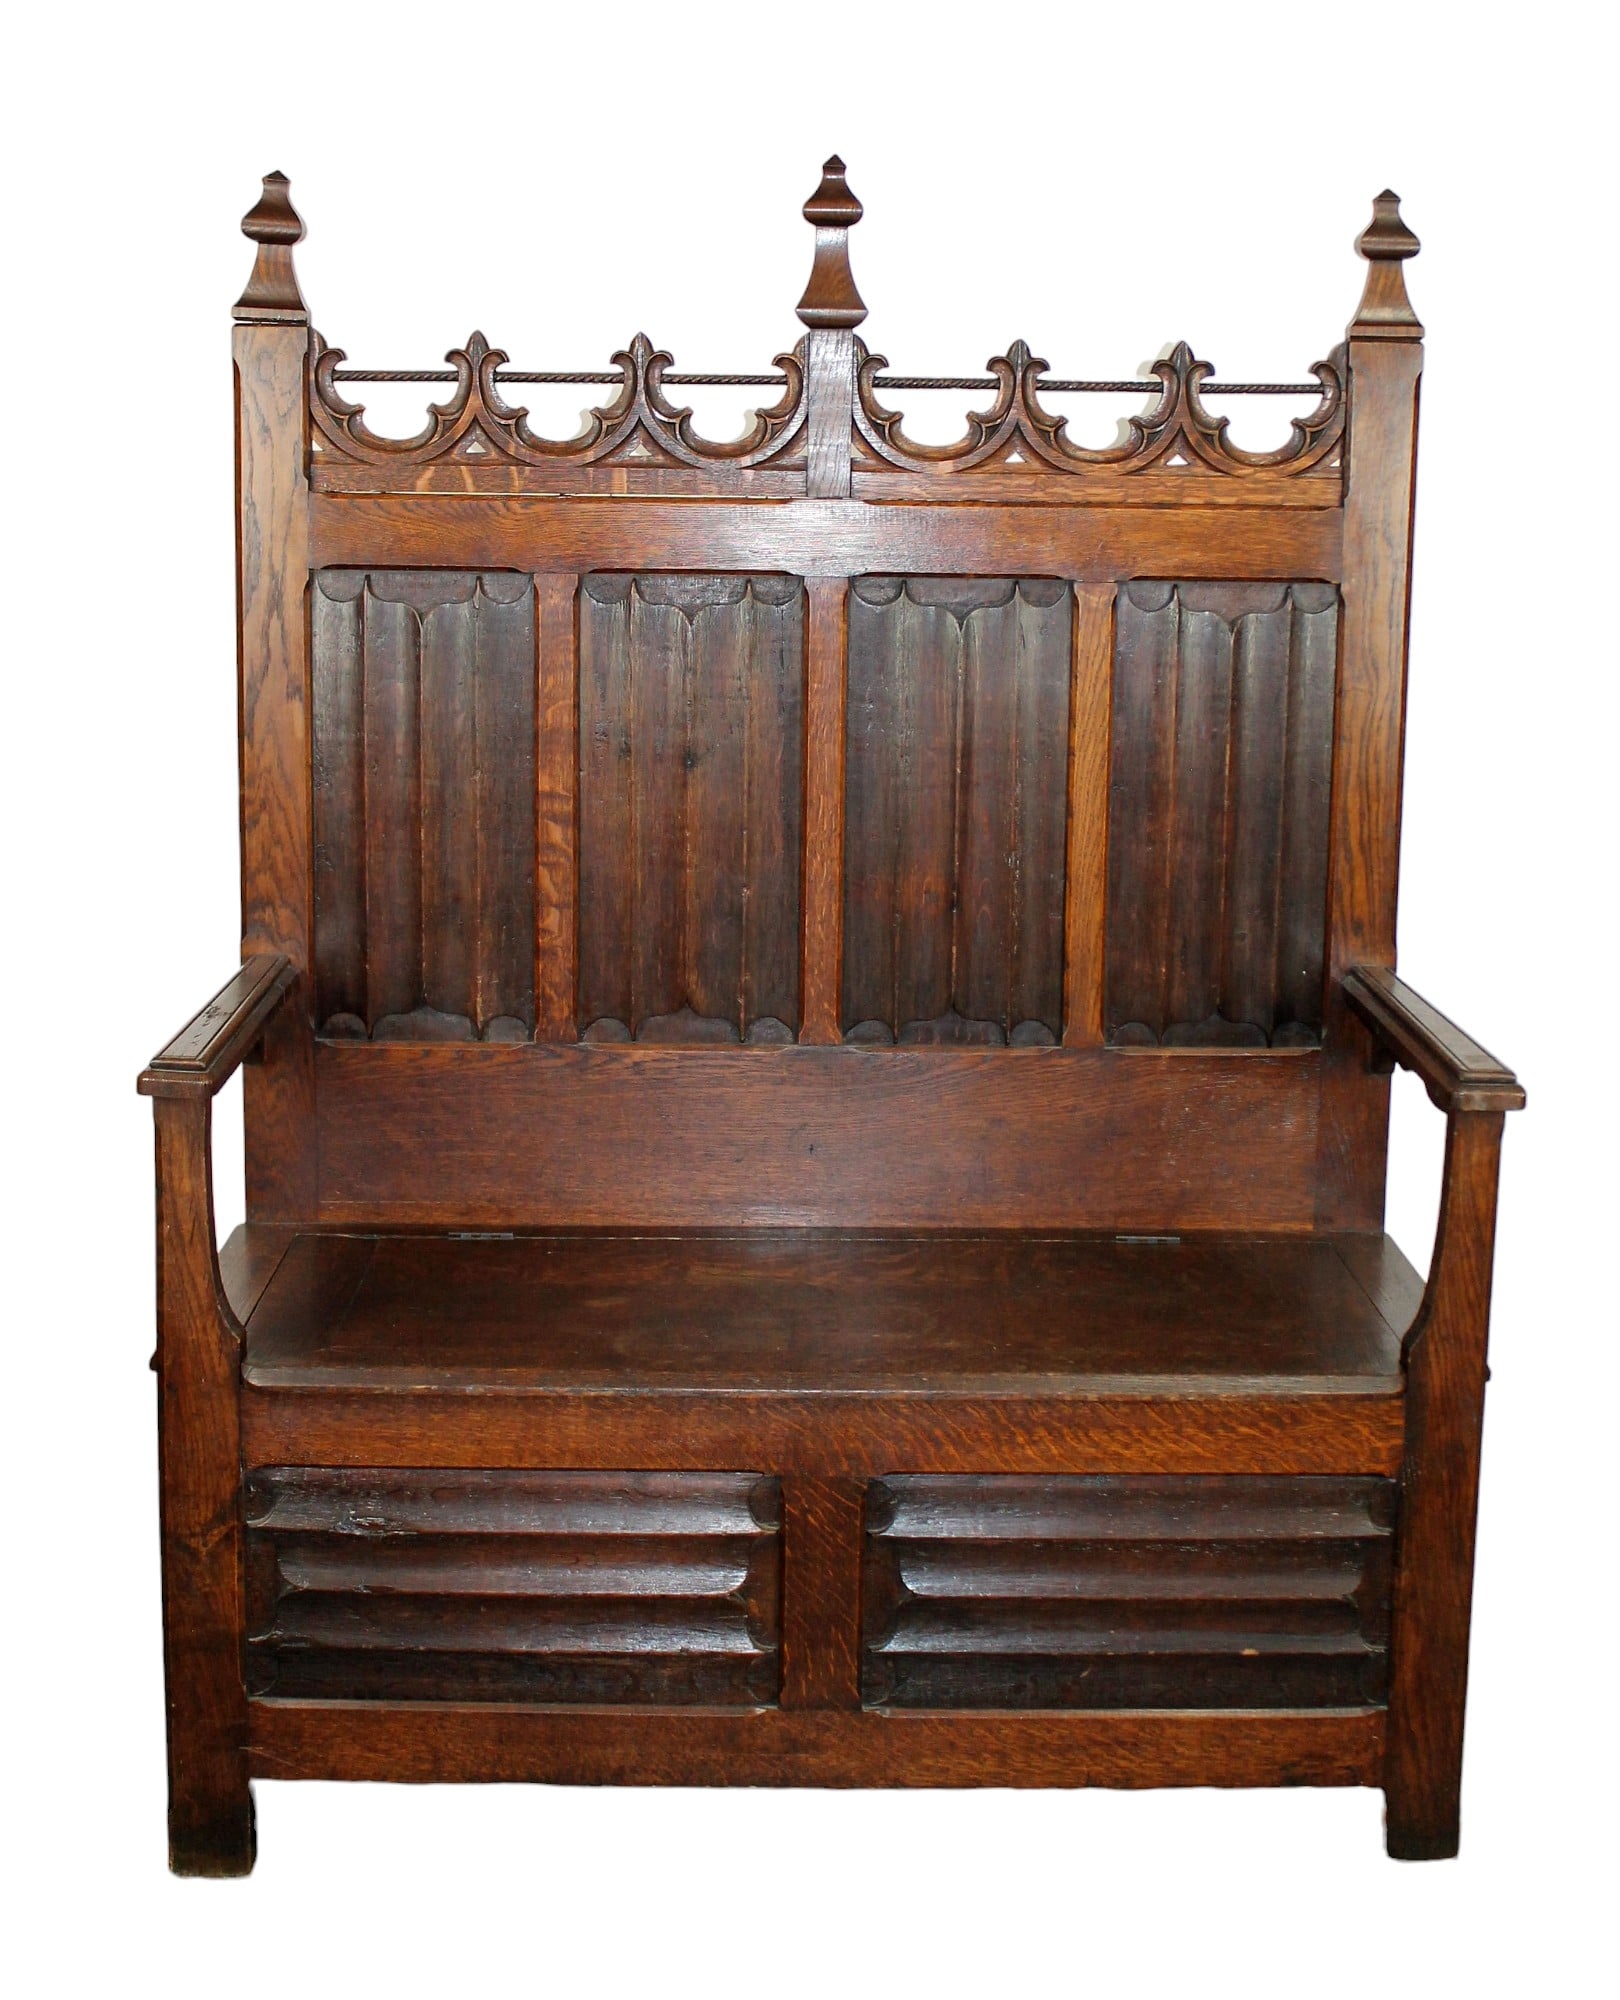 French Gothic revival oak bench with linenfold panels